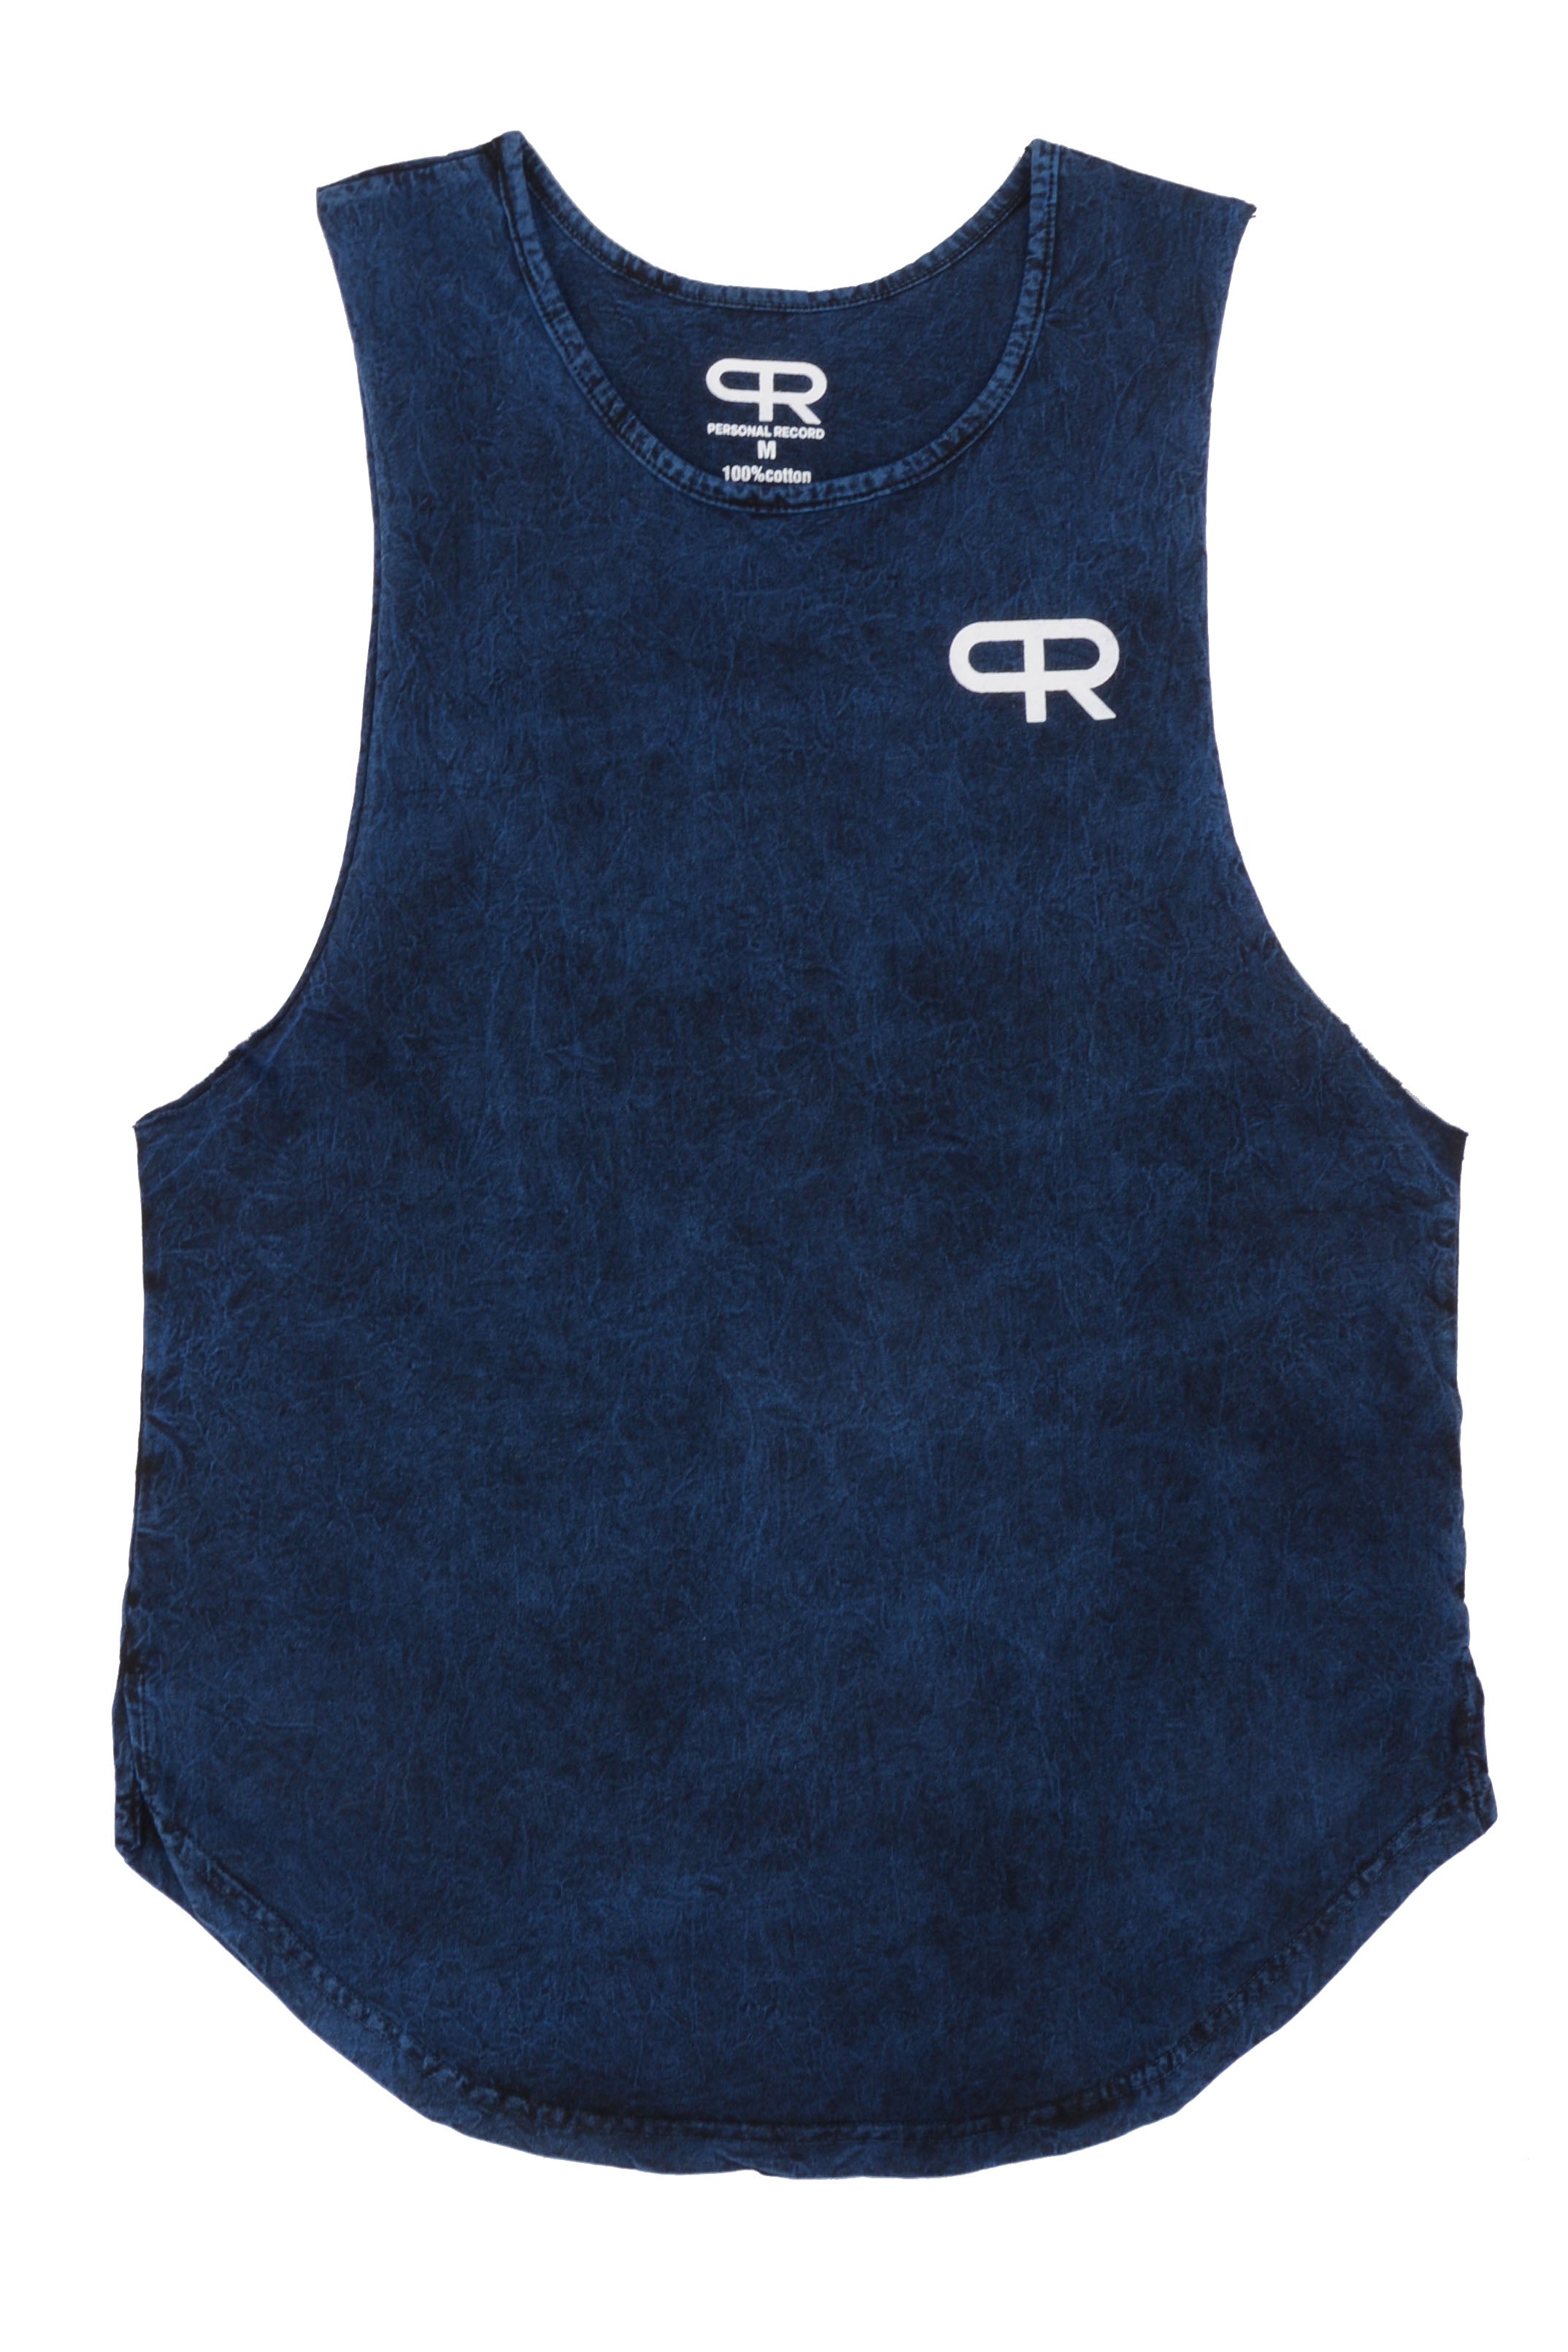 Personal Record Muscle Tank - PR309 - Mineral Wash Blue